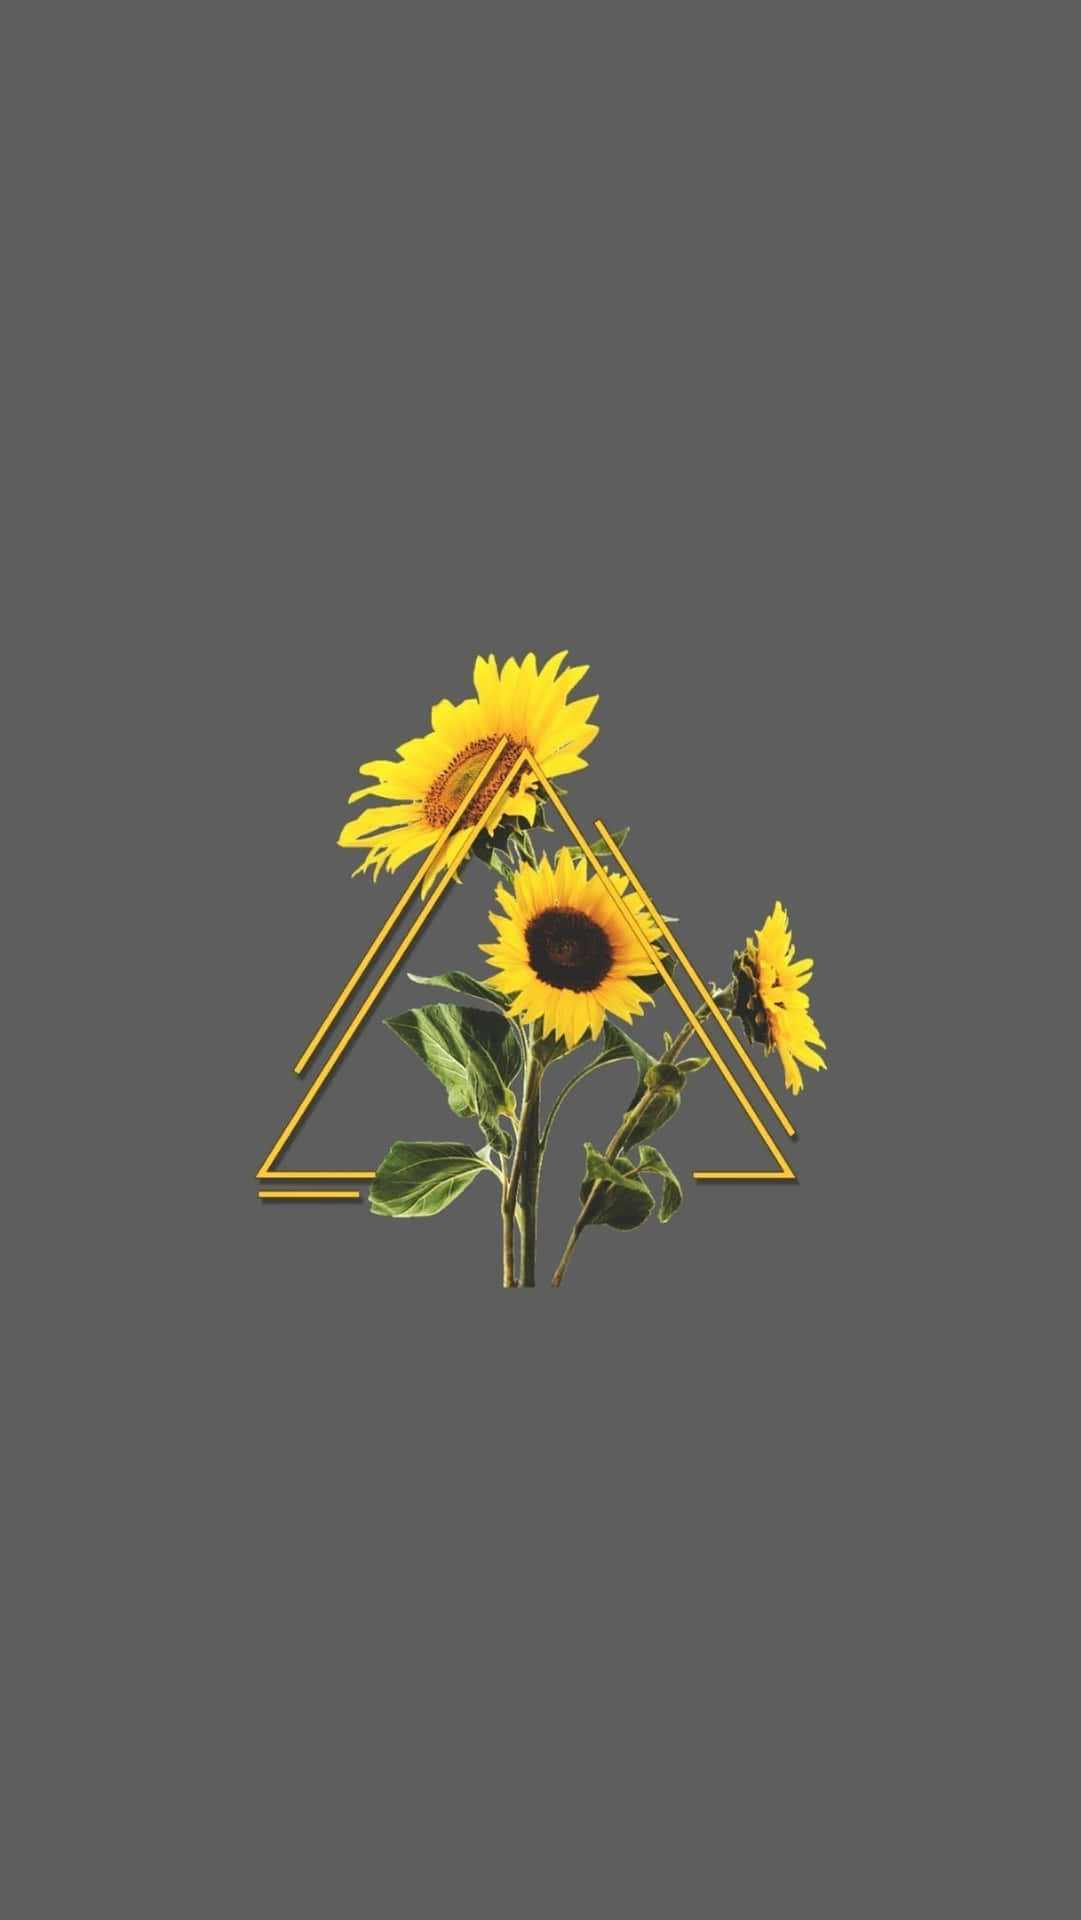 Triangle With A Sunflower Aesthetic Iphone Wallpaper